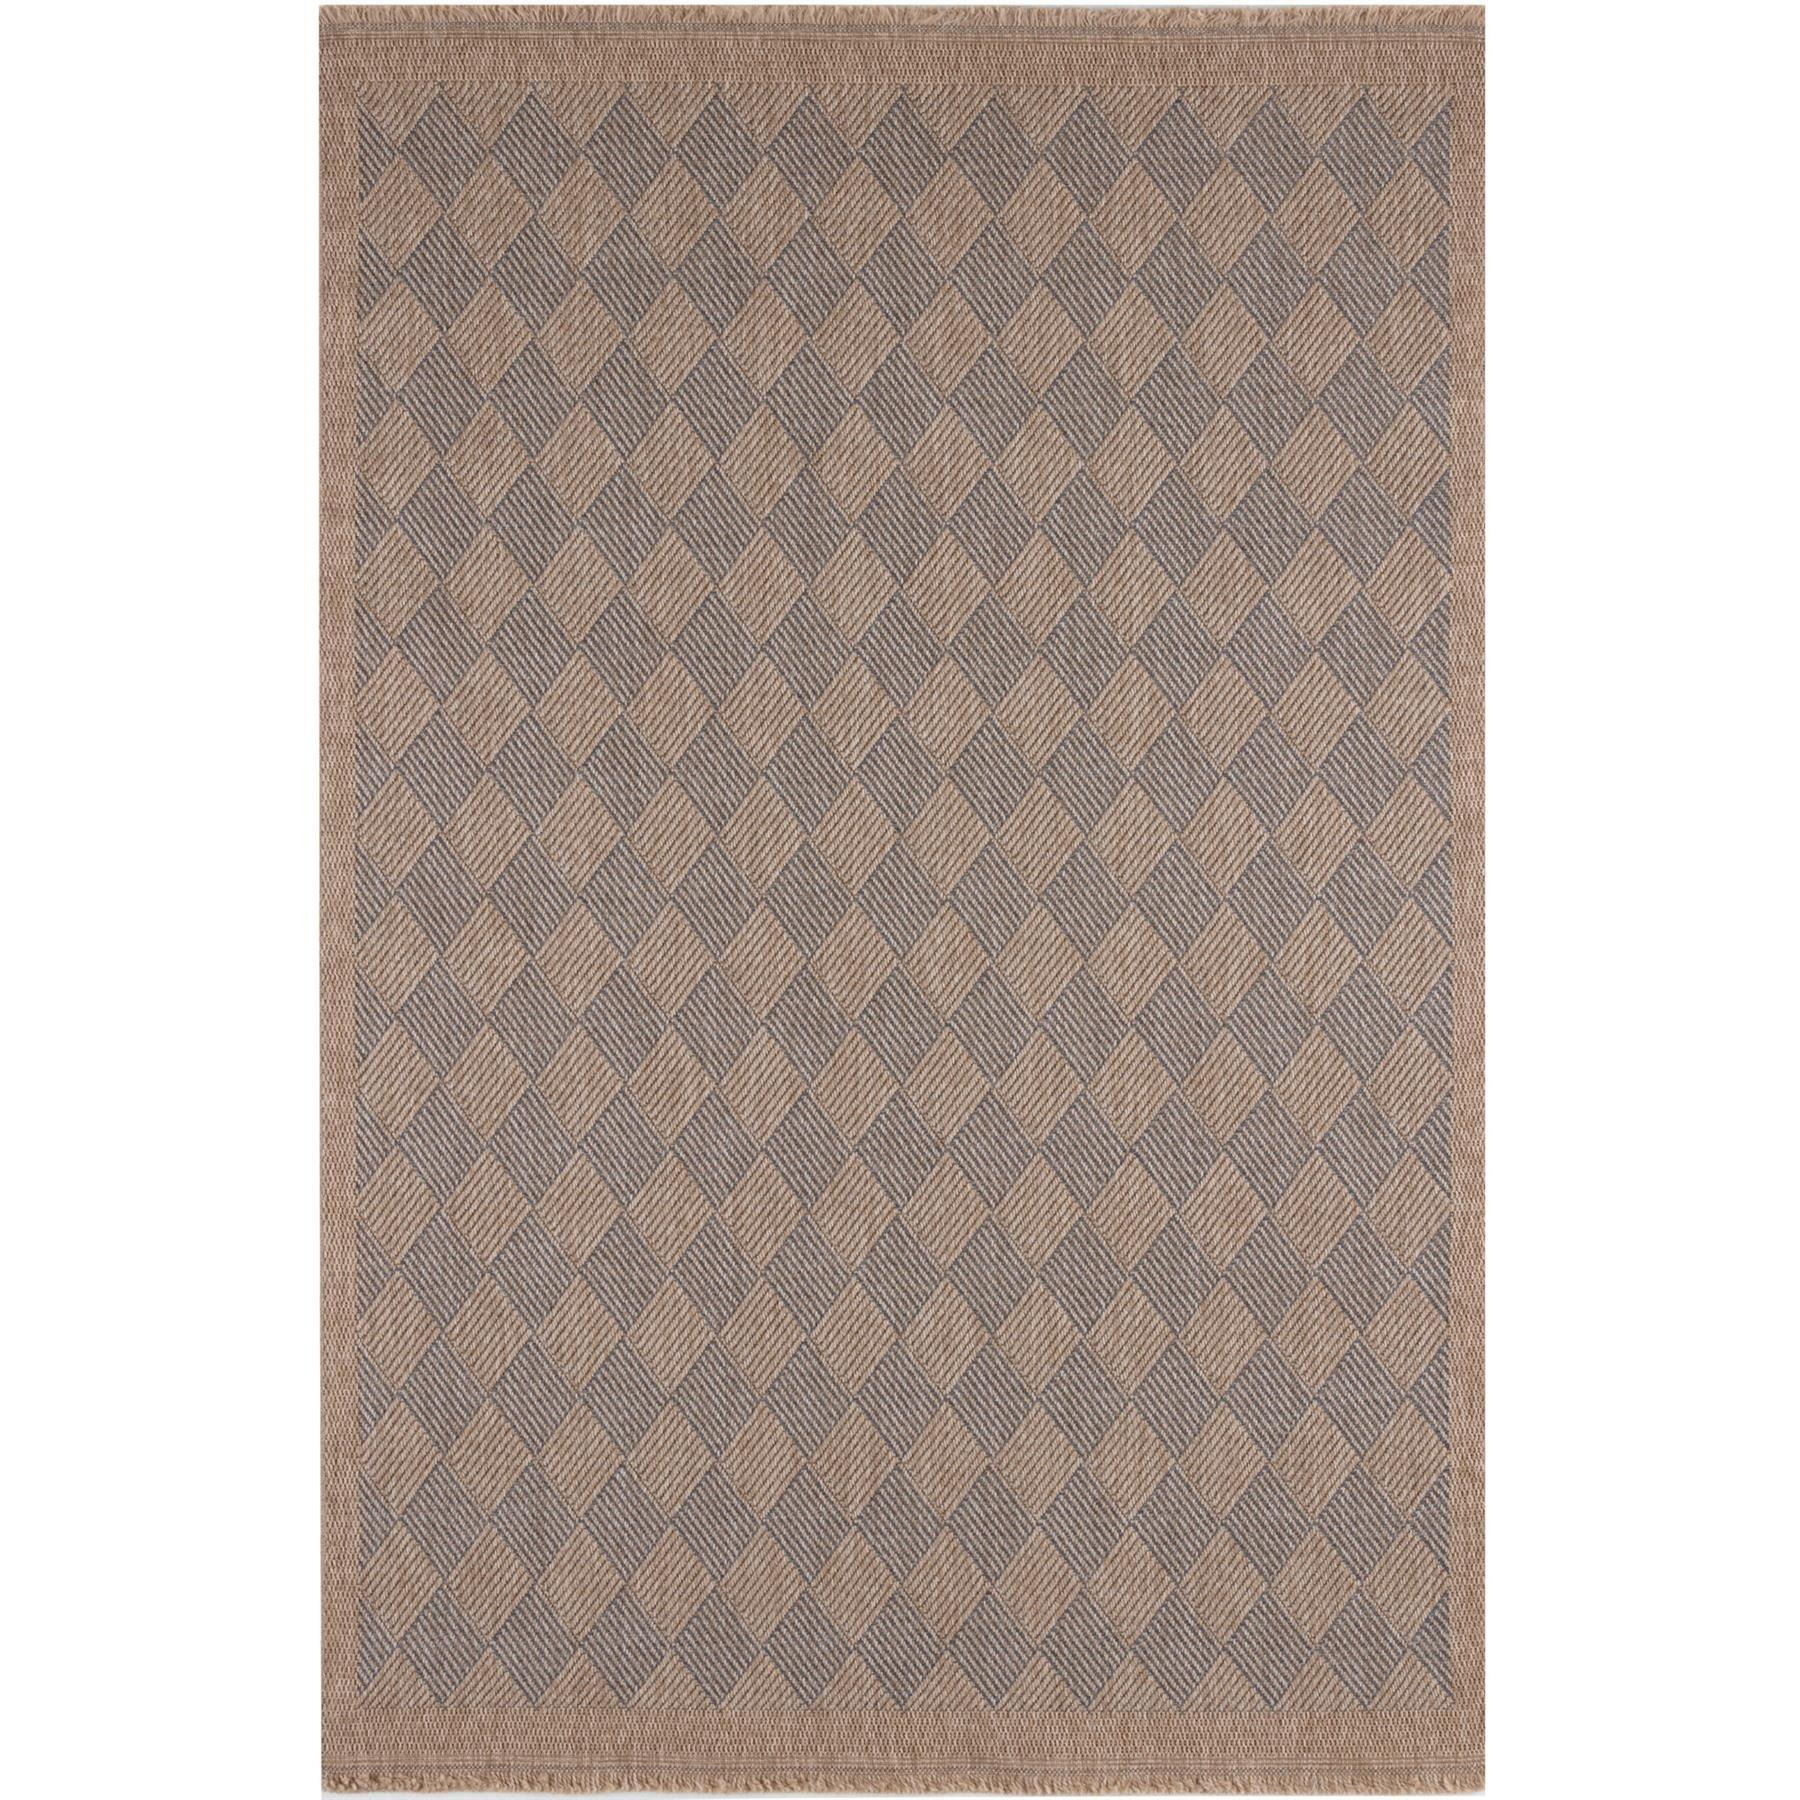 Nature Collection Outdoor Rug in Blue - 5300B - image 1